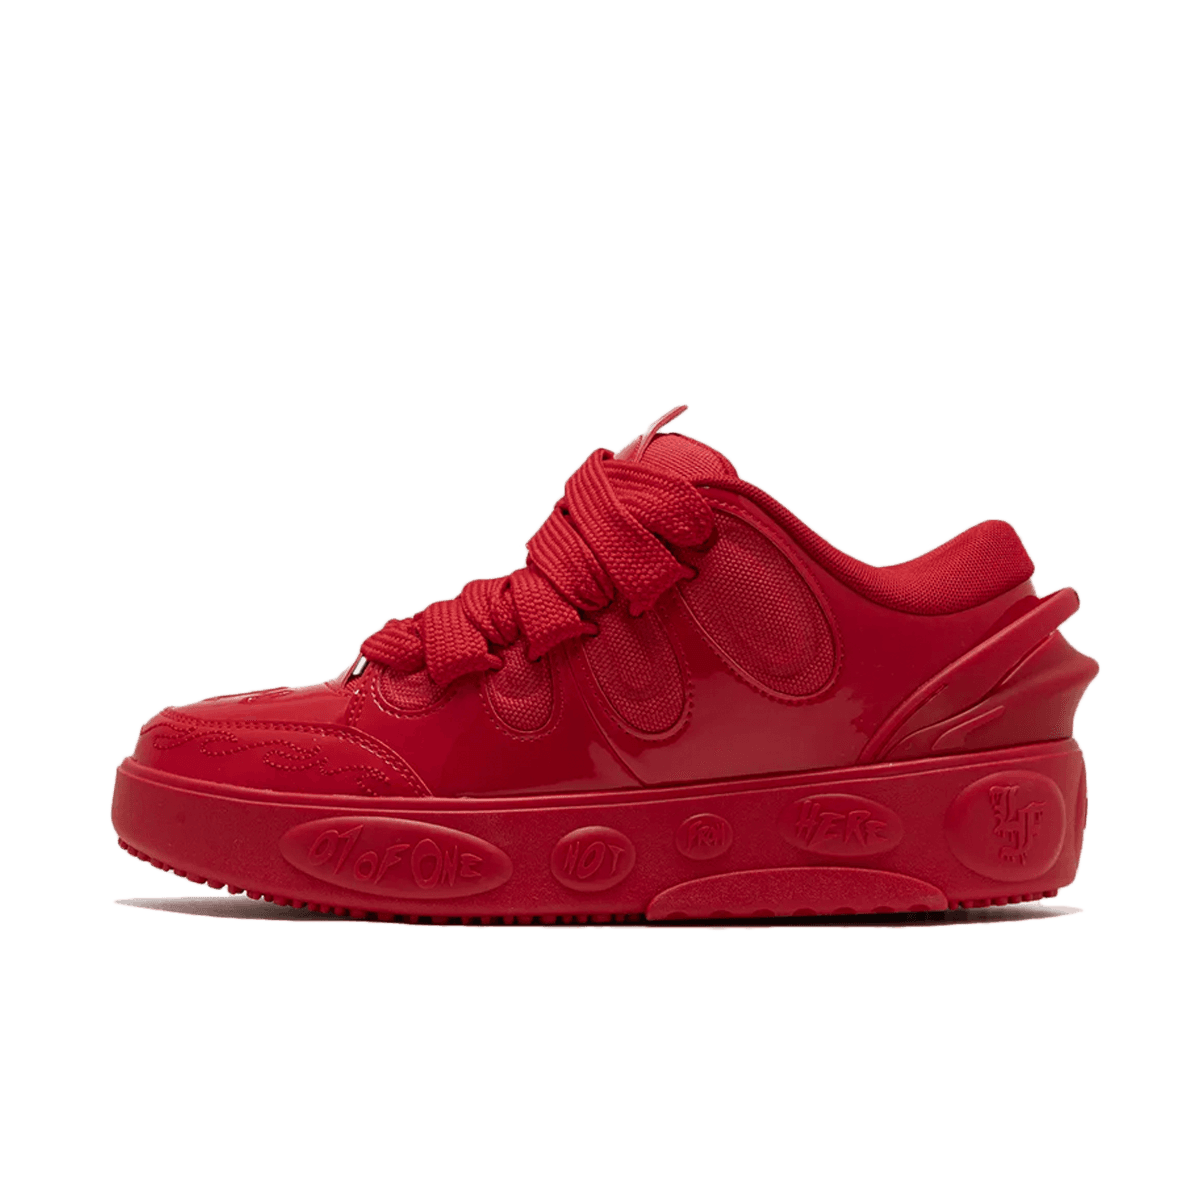 LaFrancé x Puma Hoops Amour 'For All Time Red'